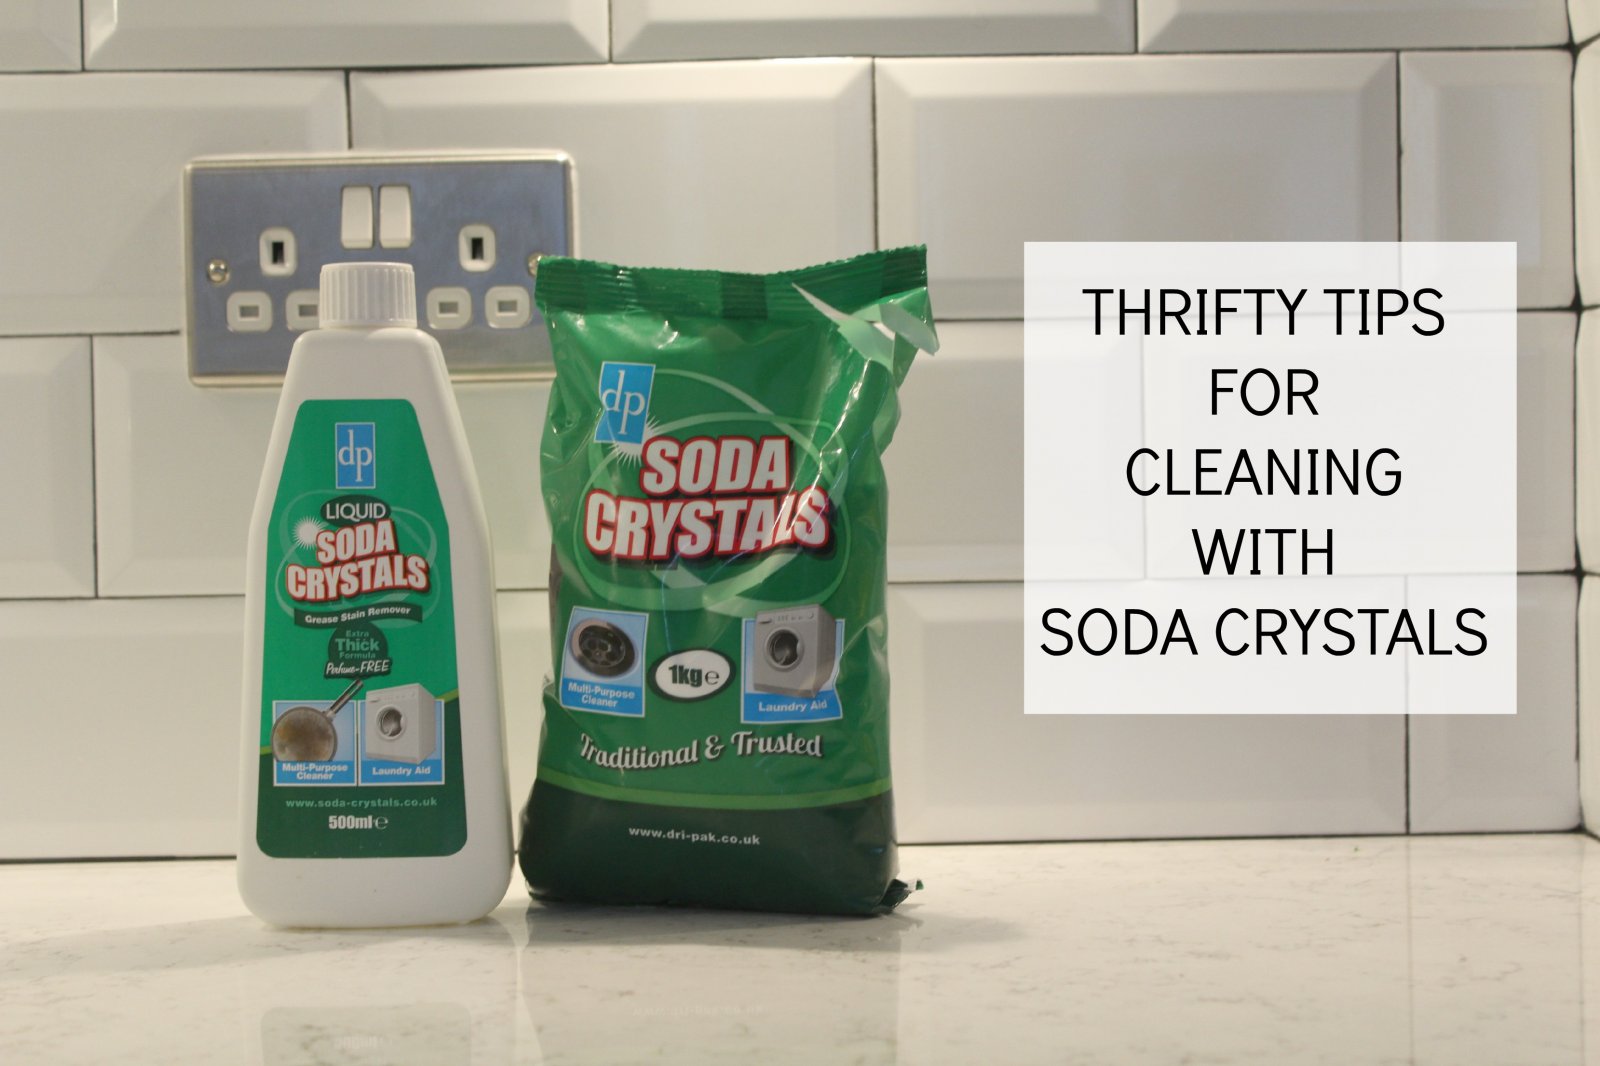 CLEANING-WITH-SODA-CRYSTALS.jpg